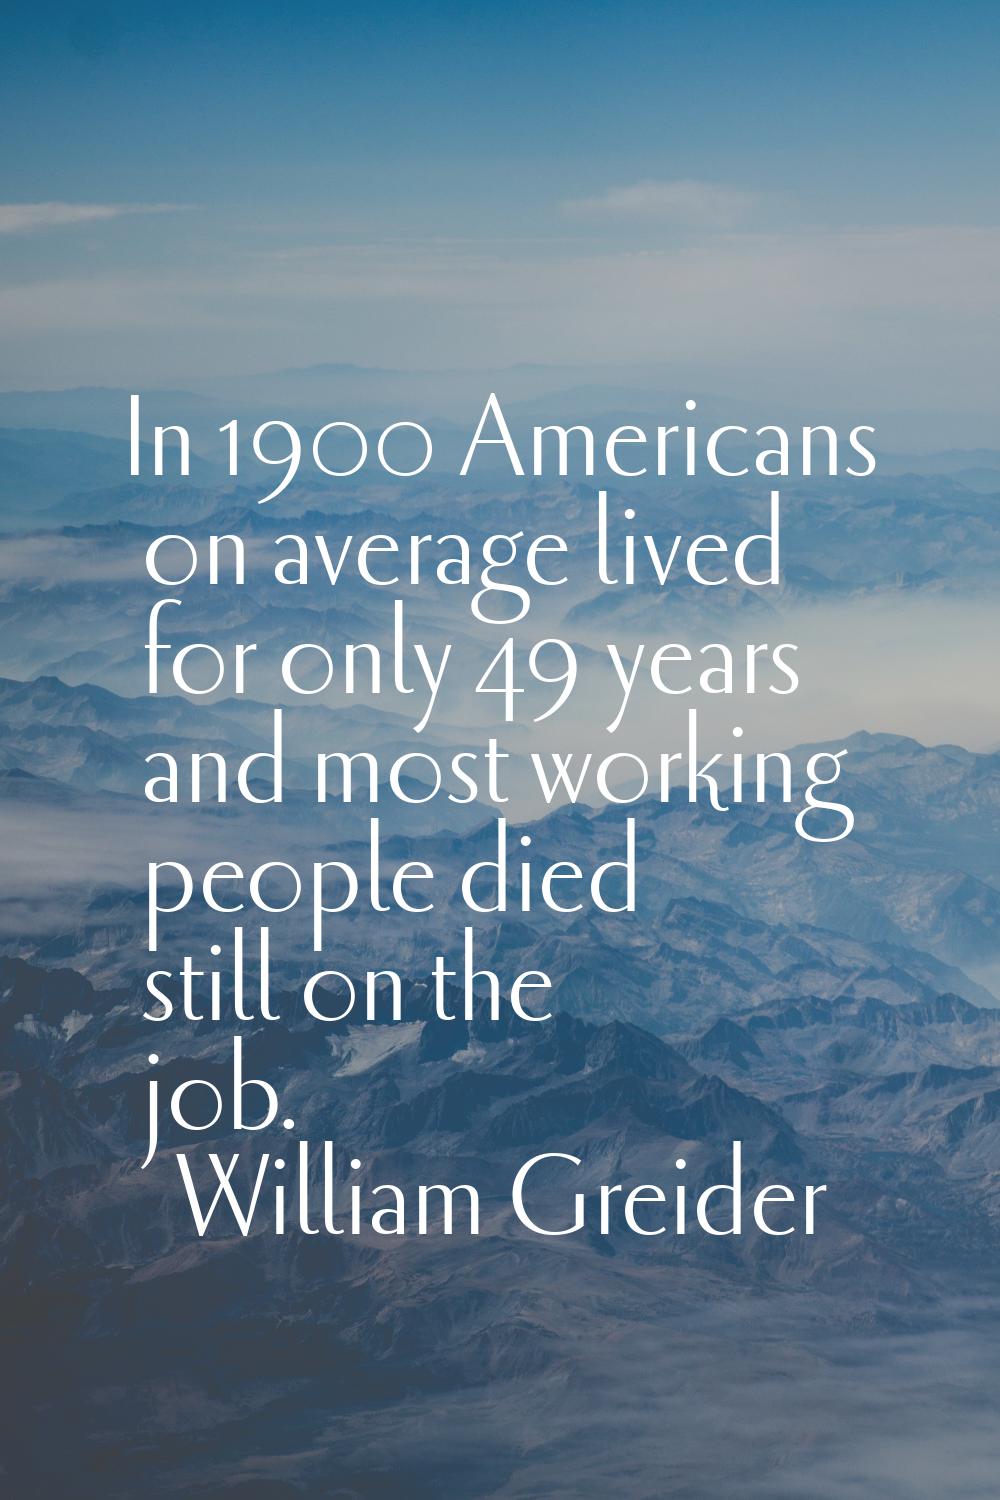 In 1900 Americans on average lived for only 49 years and most working people died still on the job.